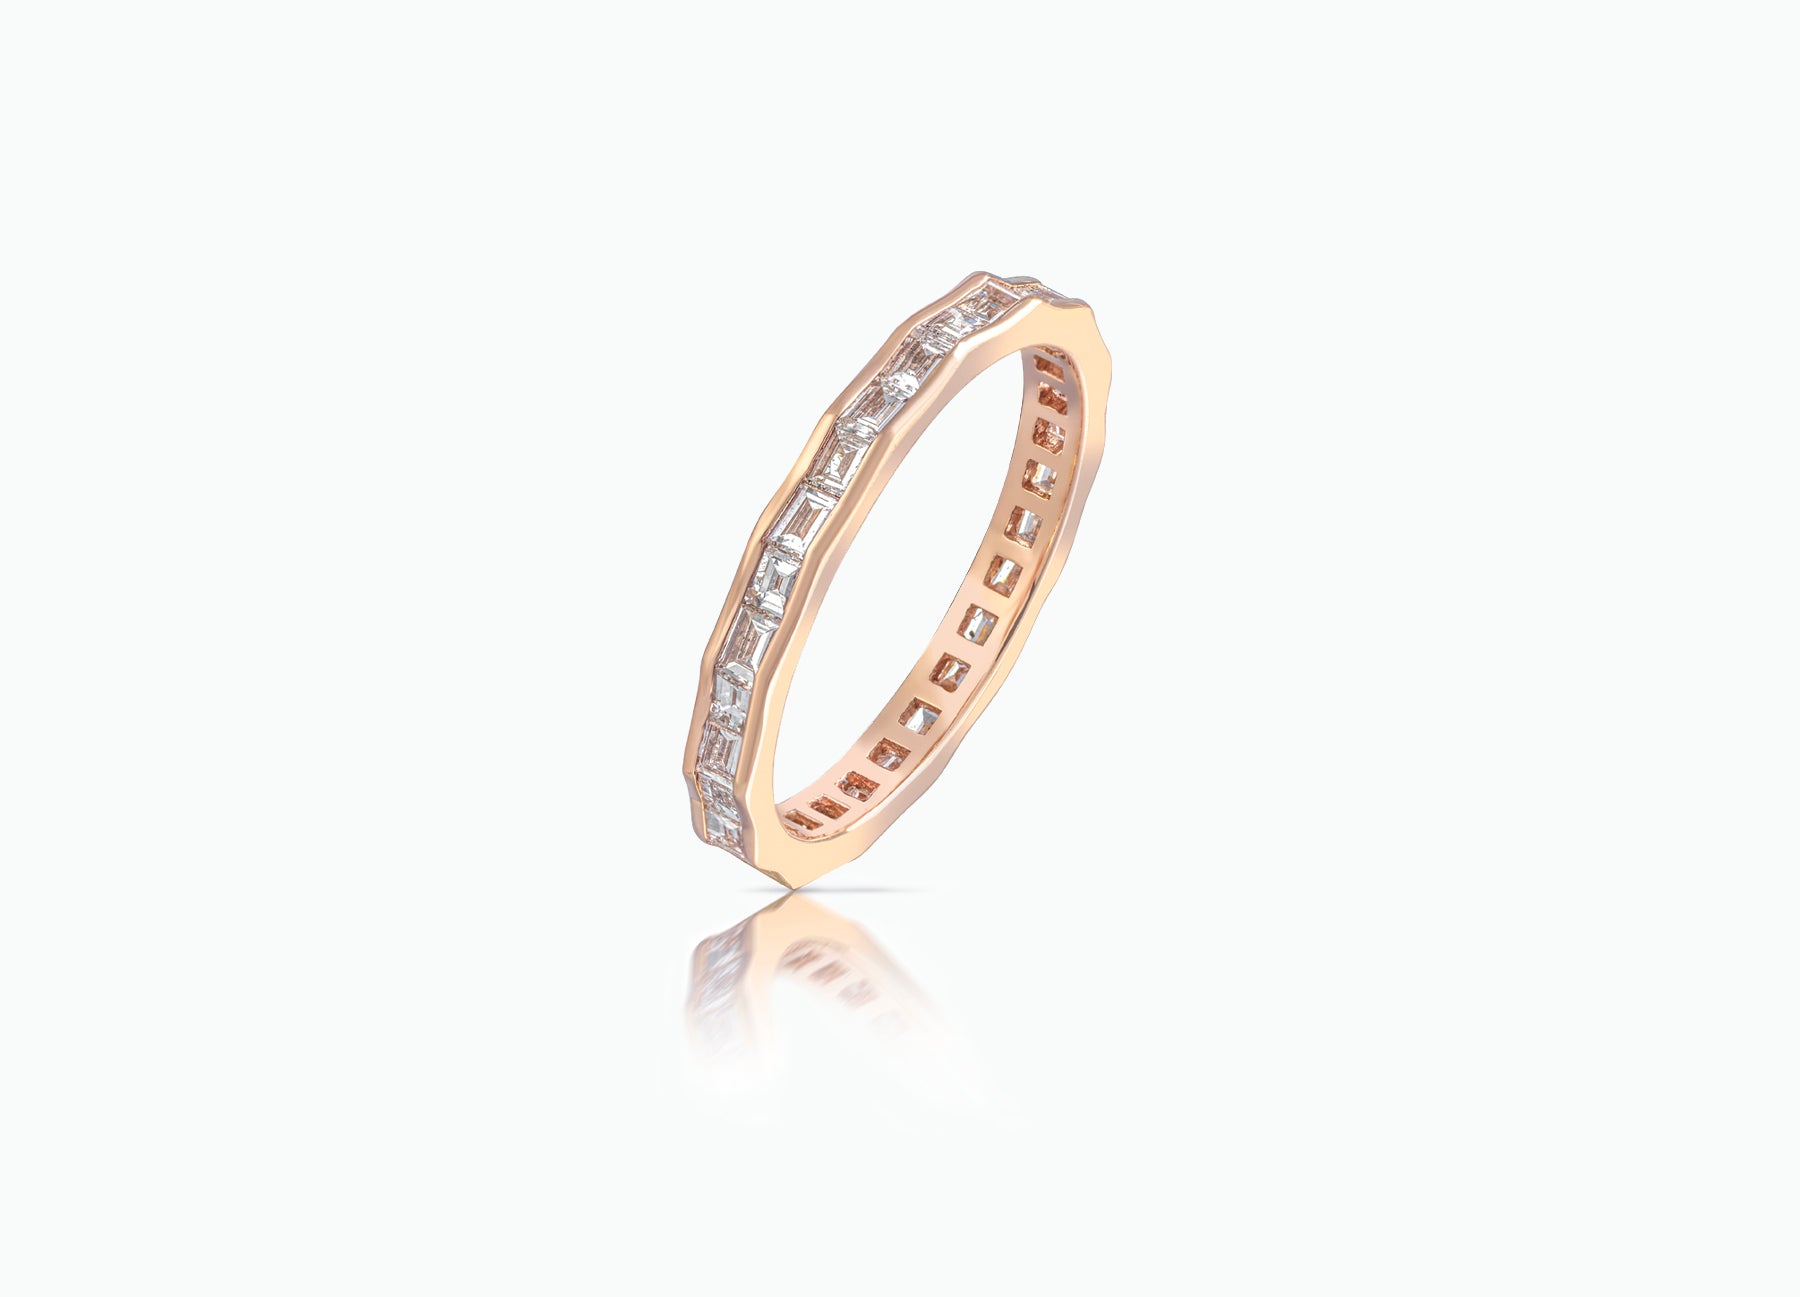 Contemporary Pleat Eternity Wedding Band by Tomasz Donocik set with baguette diamonds all around by Tomasz Donocik side view